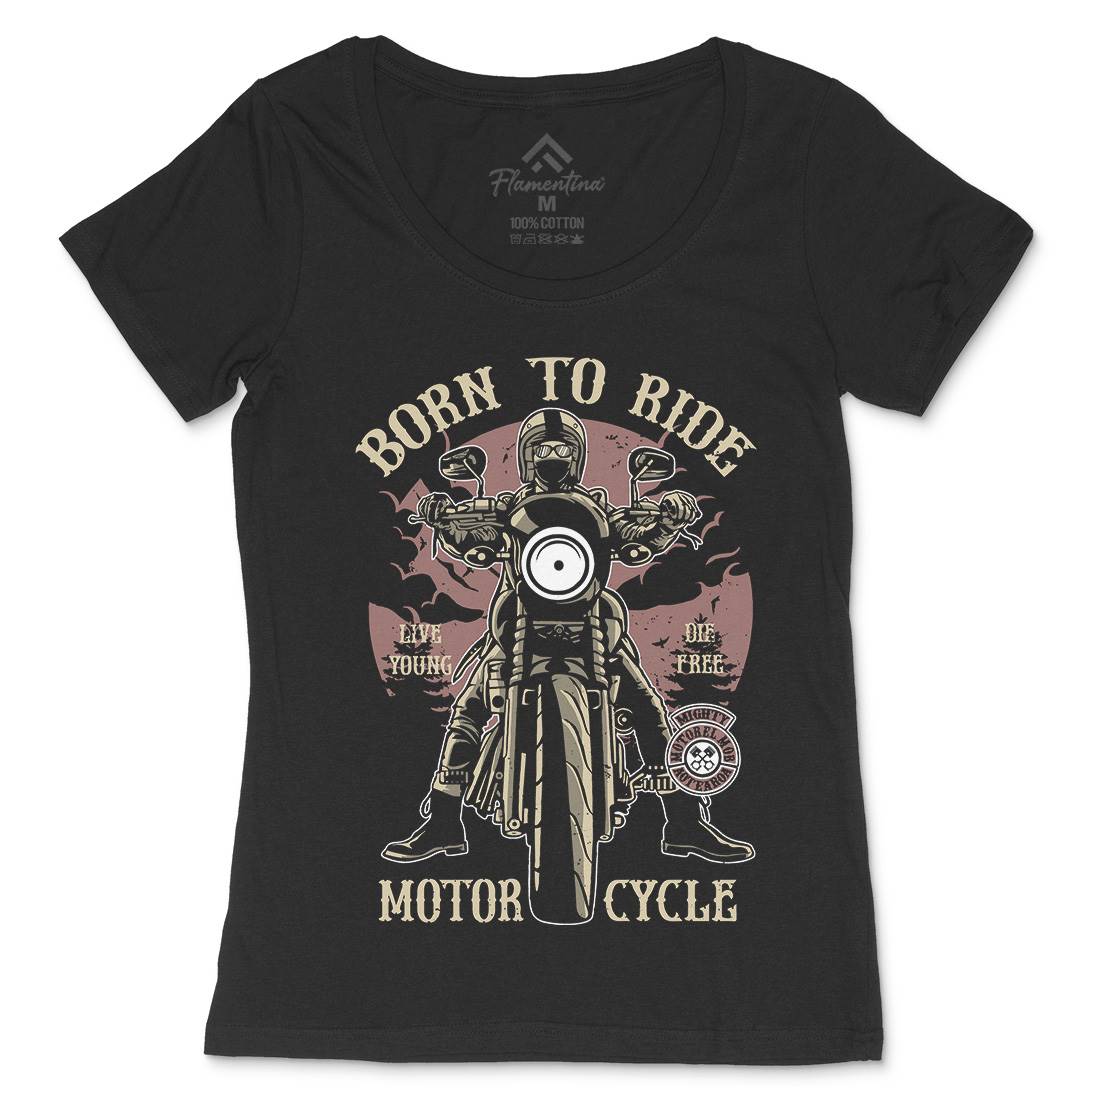 Born To Ride Womens Scoop Neck T-Shirt Motorcycles A512